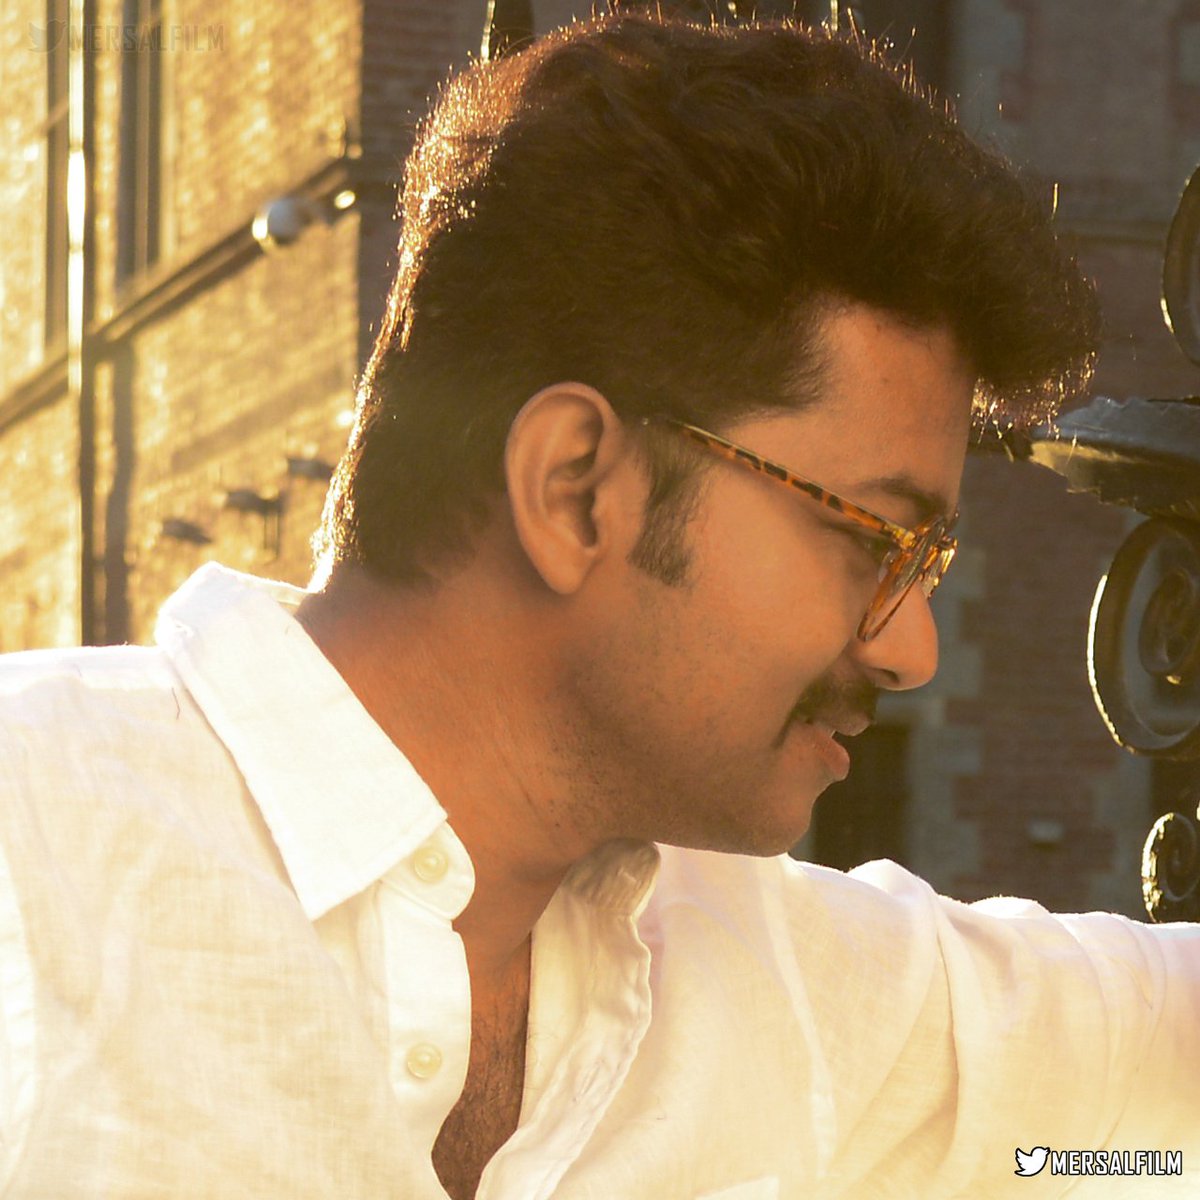 Pin by Mersal on wallpaper | Vijay actor hd images, New photos hd, Actor  photo